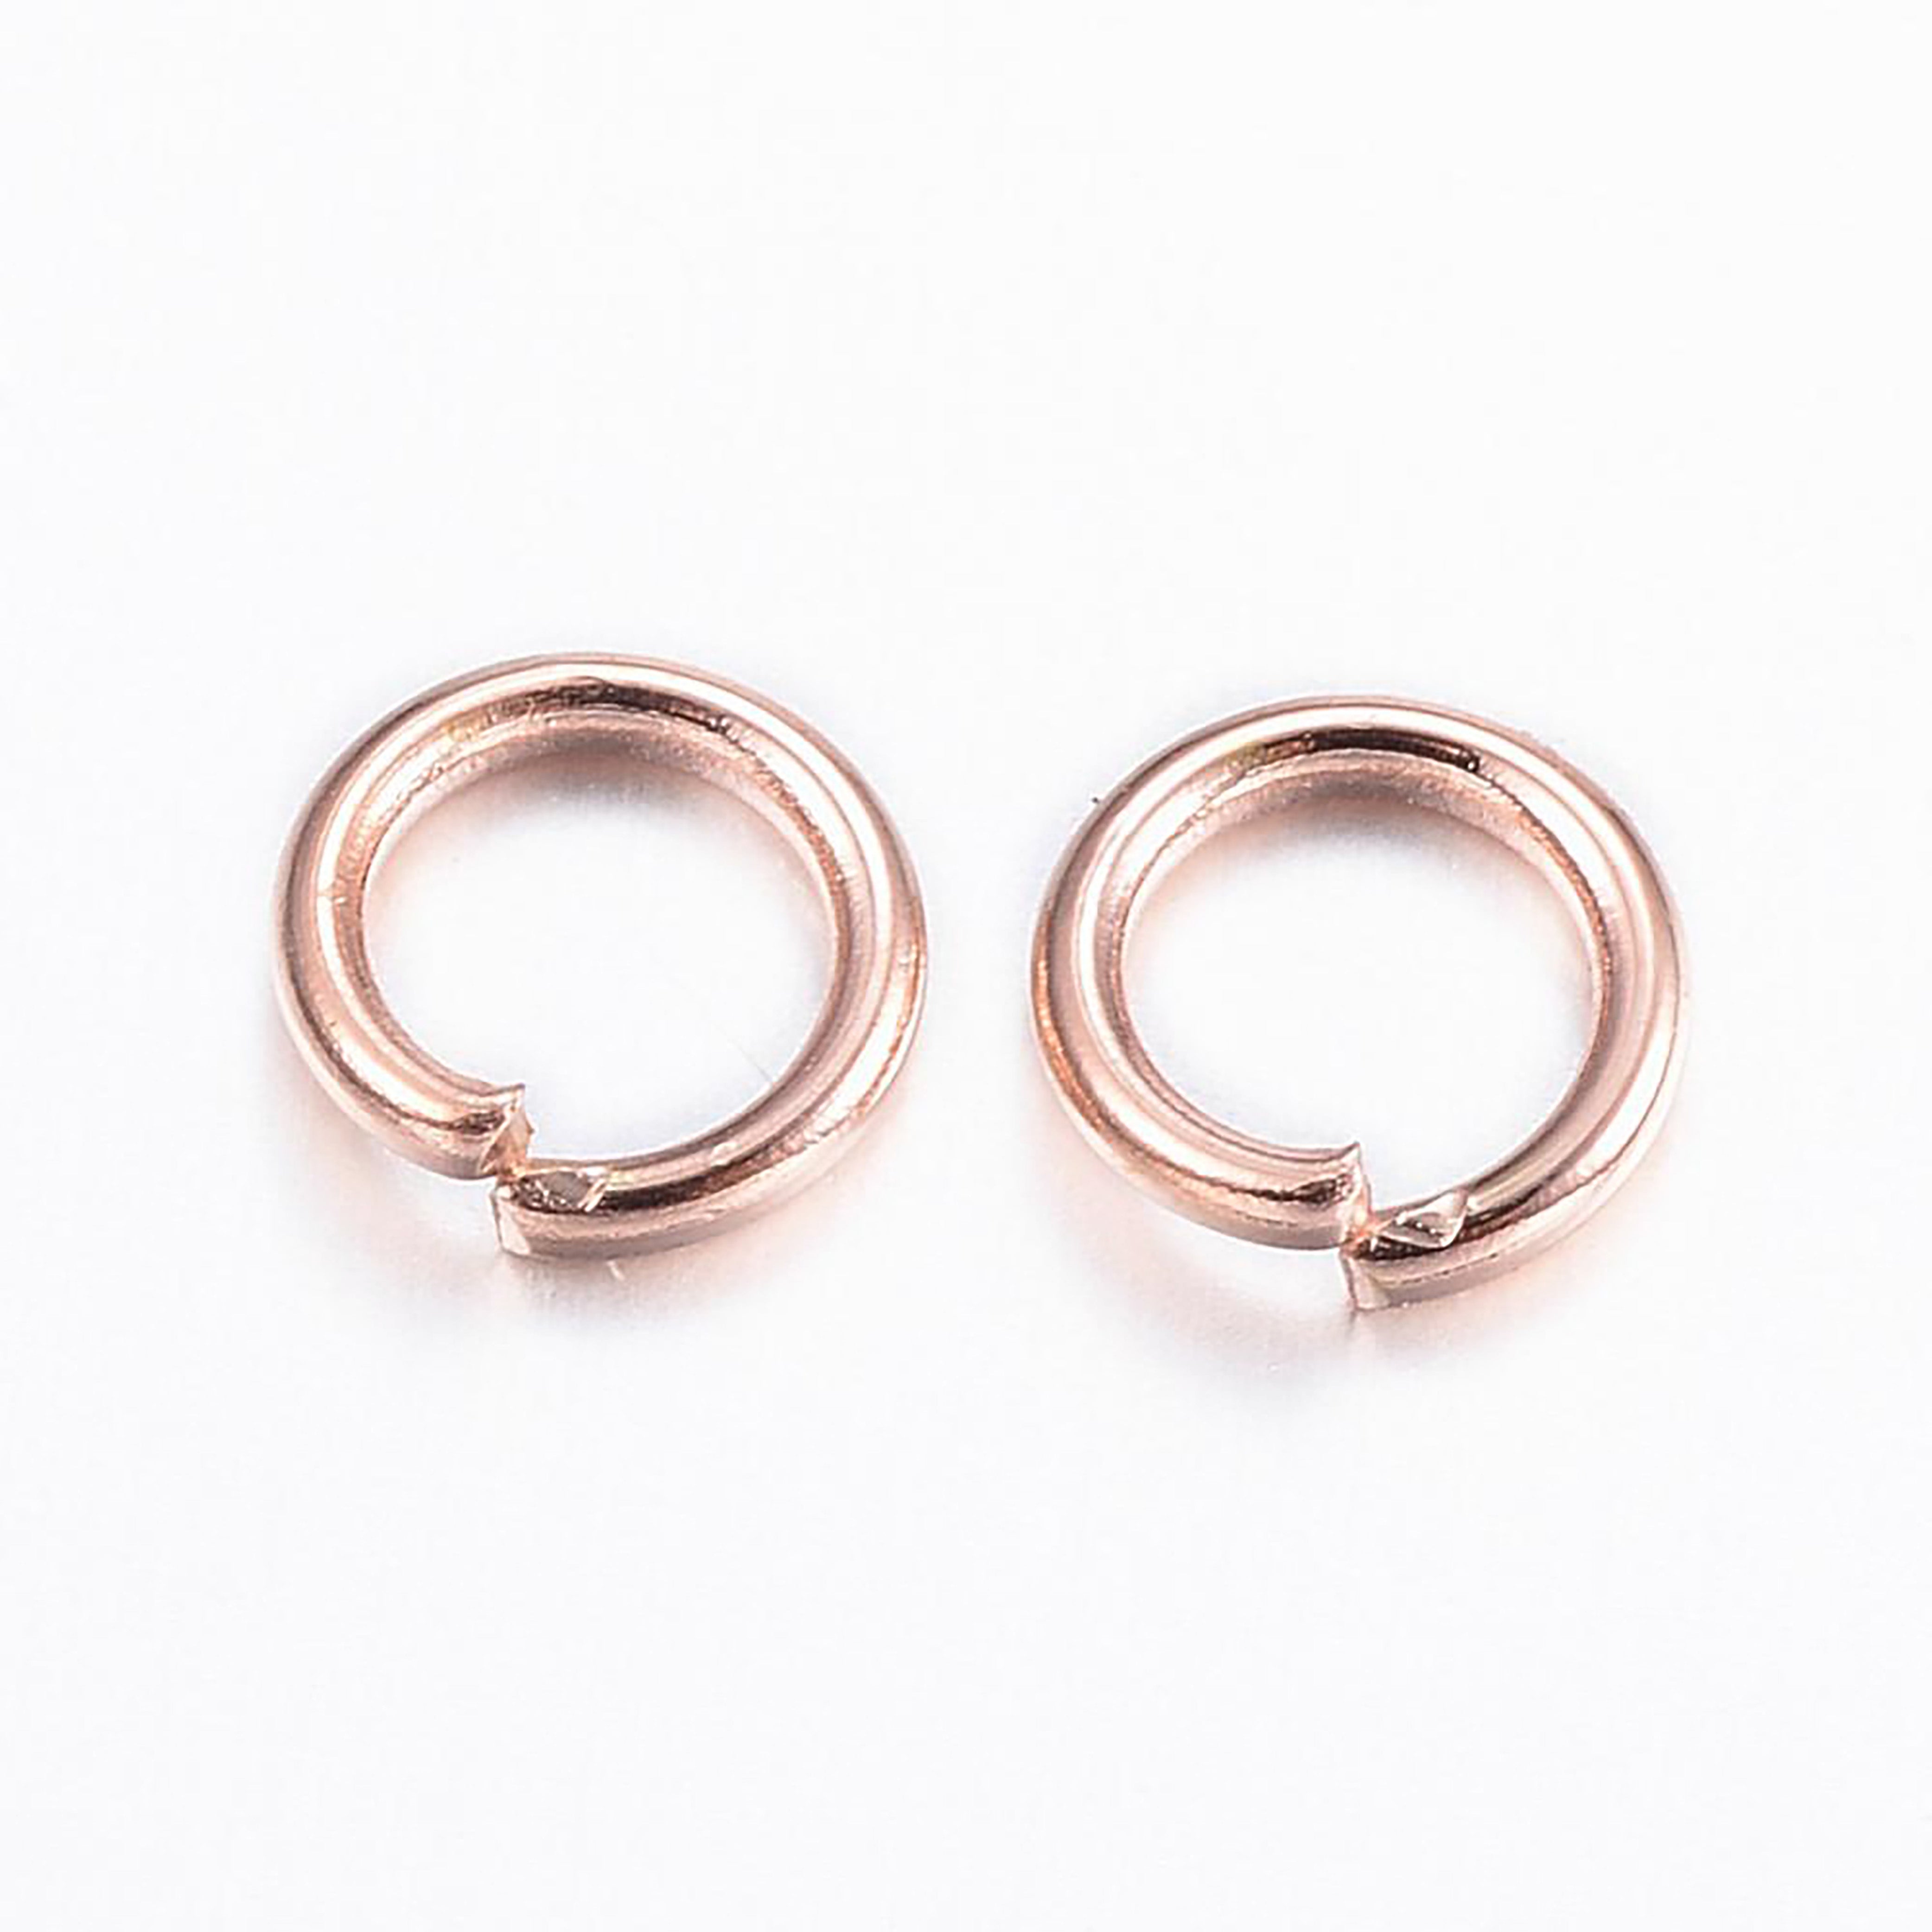 10pcs, 4.5mmx0.7mm, 304 Stainless Steel Open Jump Rings in Rose Gold